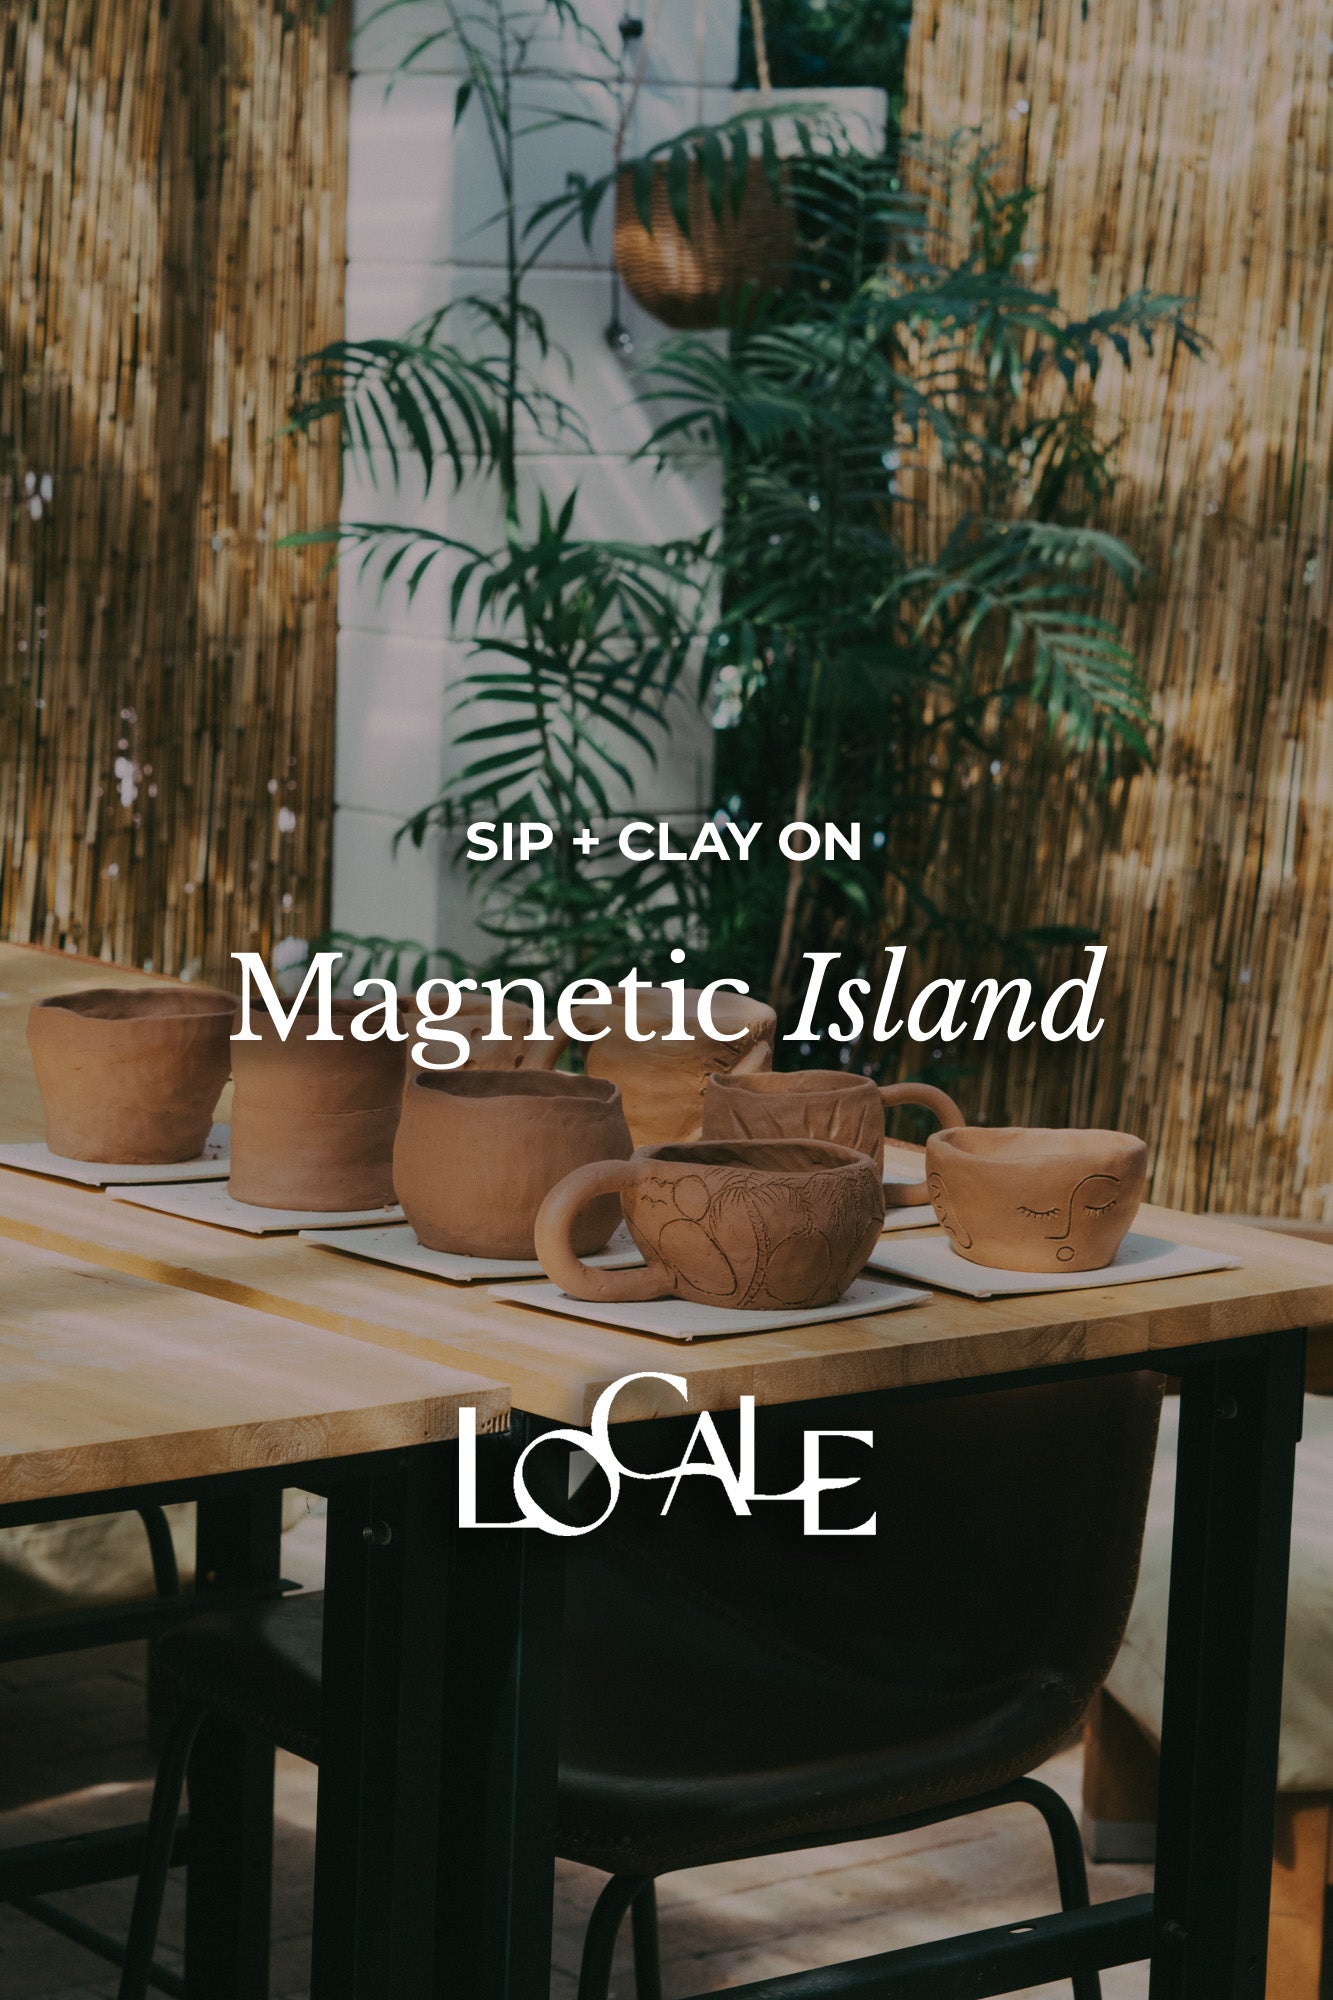 Next Of Kin x Locale — Sip + Clay on Magnetic Island